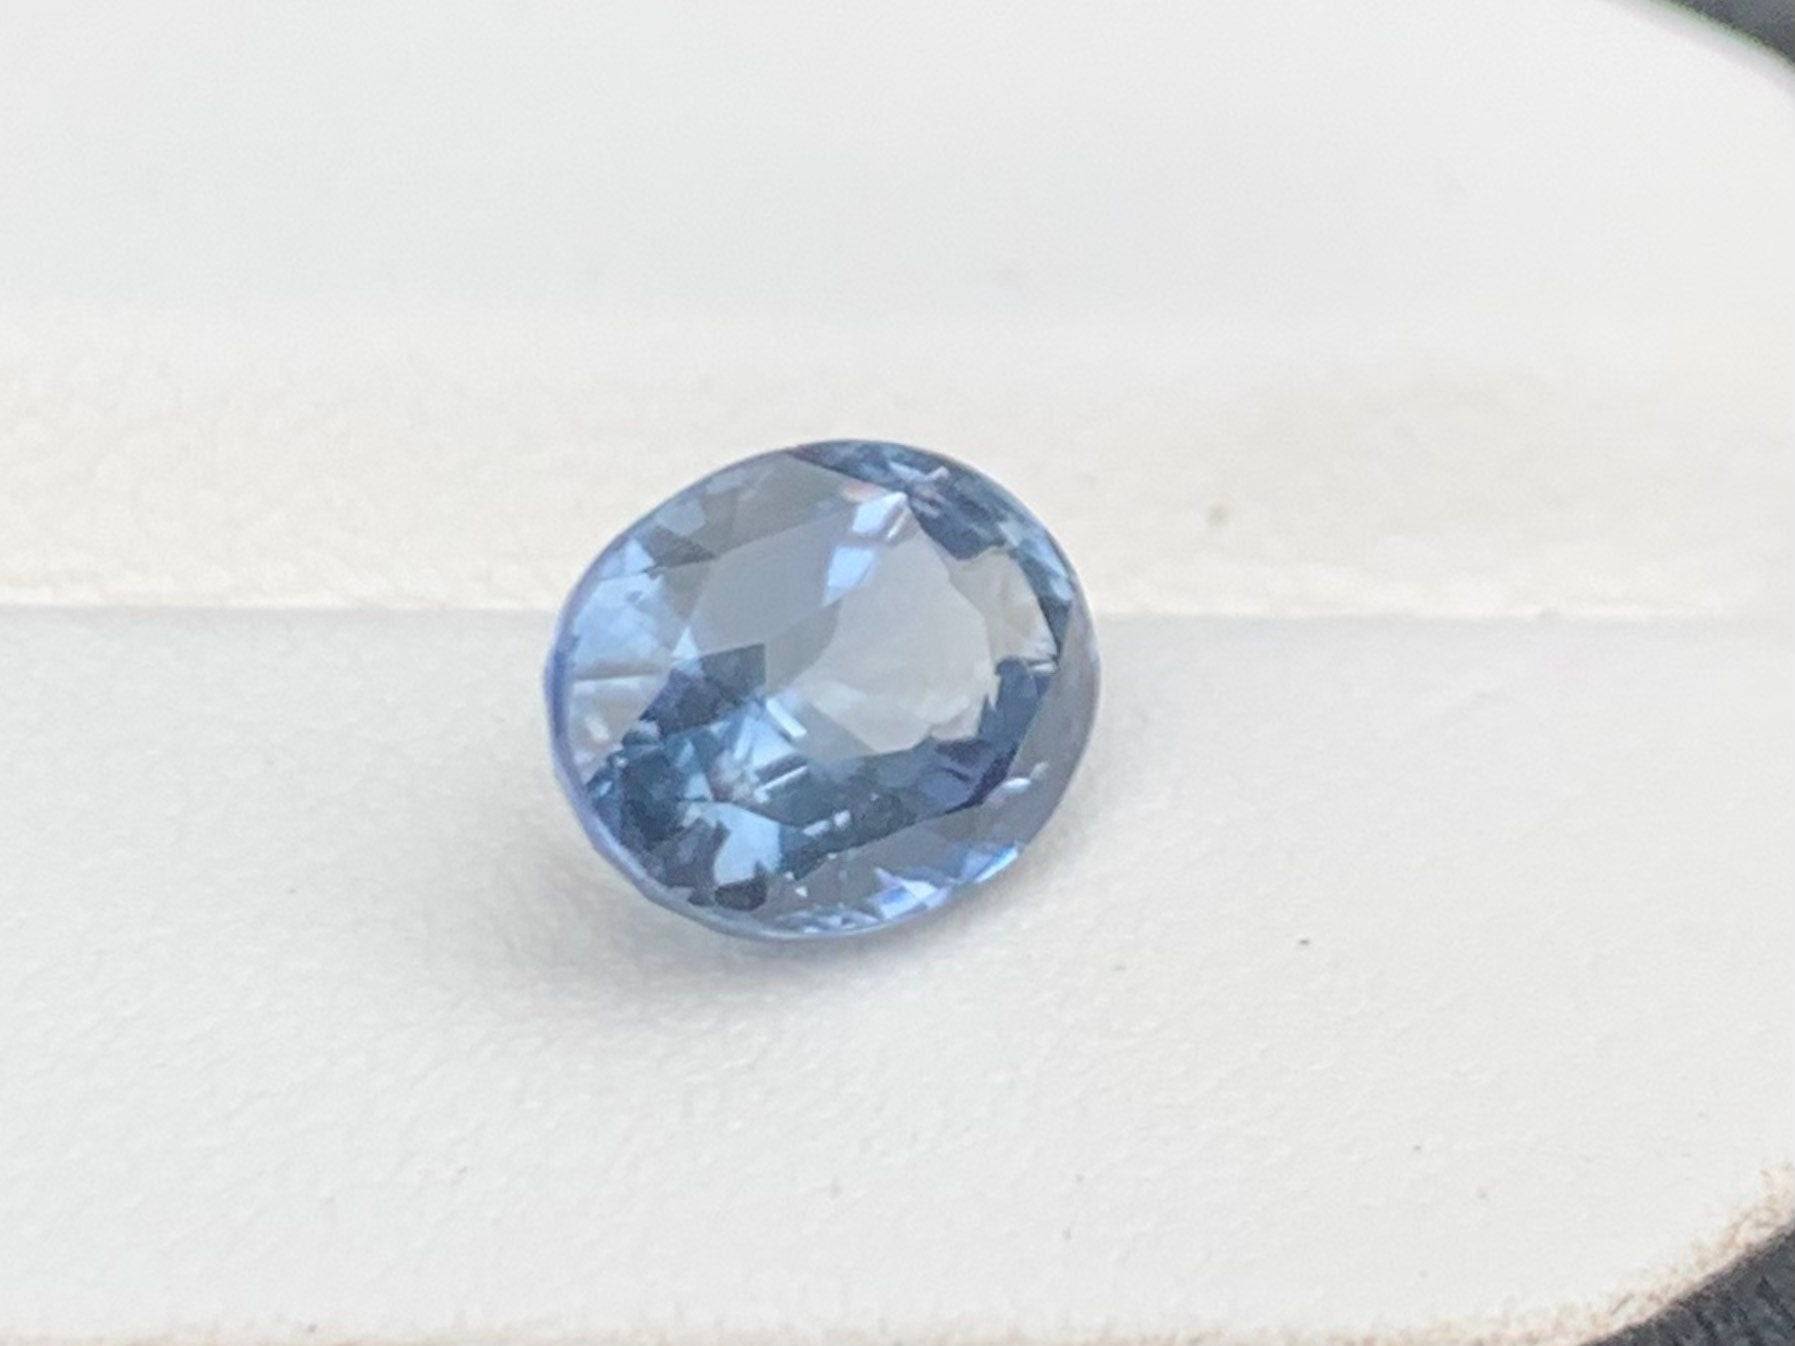 Silver Sapphire 3.37 Cts, Silver Sapphire Loose Gemstone, White Sapphire Gemstone for Gift, Silver Sapphire for Jewelry Making, Gift for her - Baza Boutique 